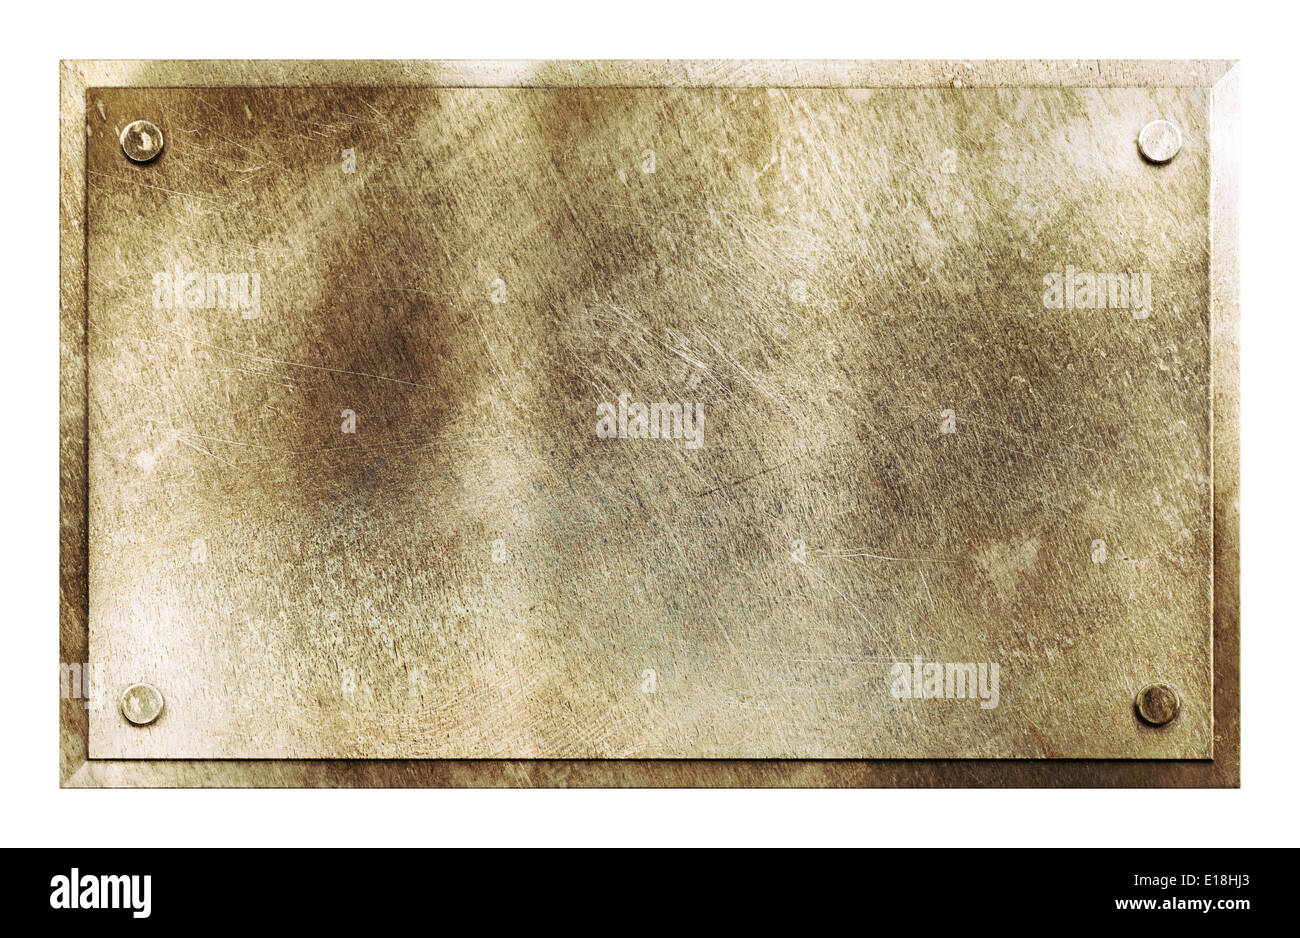 Rustic shiny brass yellow metal sign plate with rivets texture background isolated on white Stock Photo